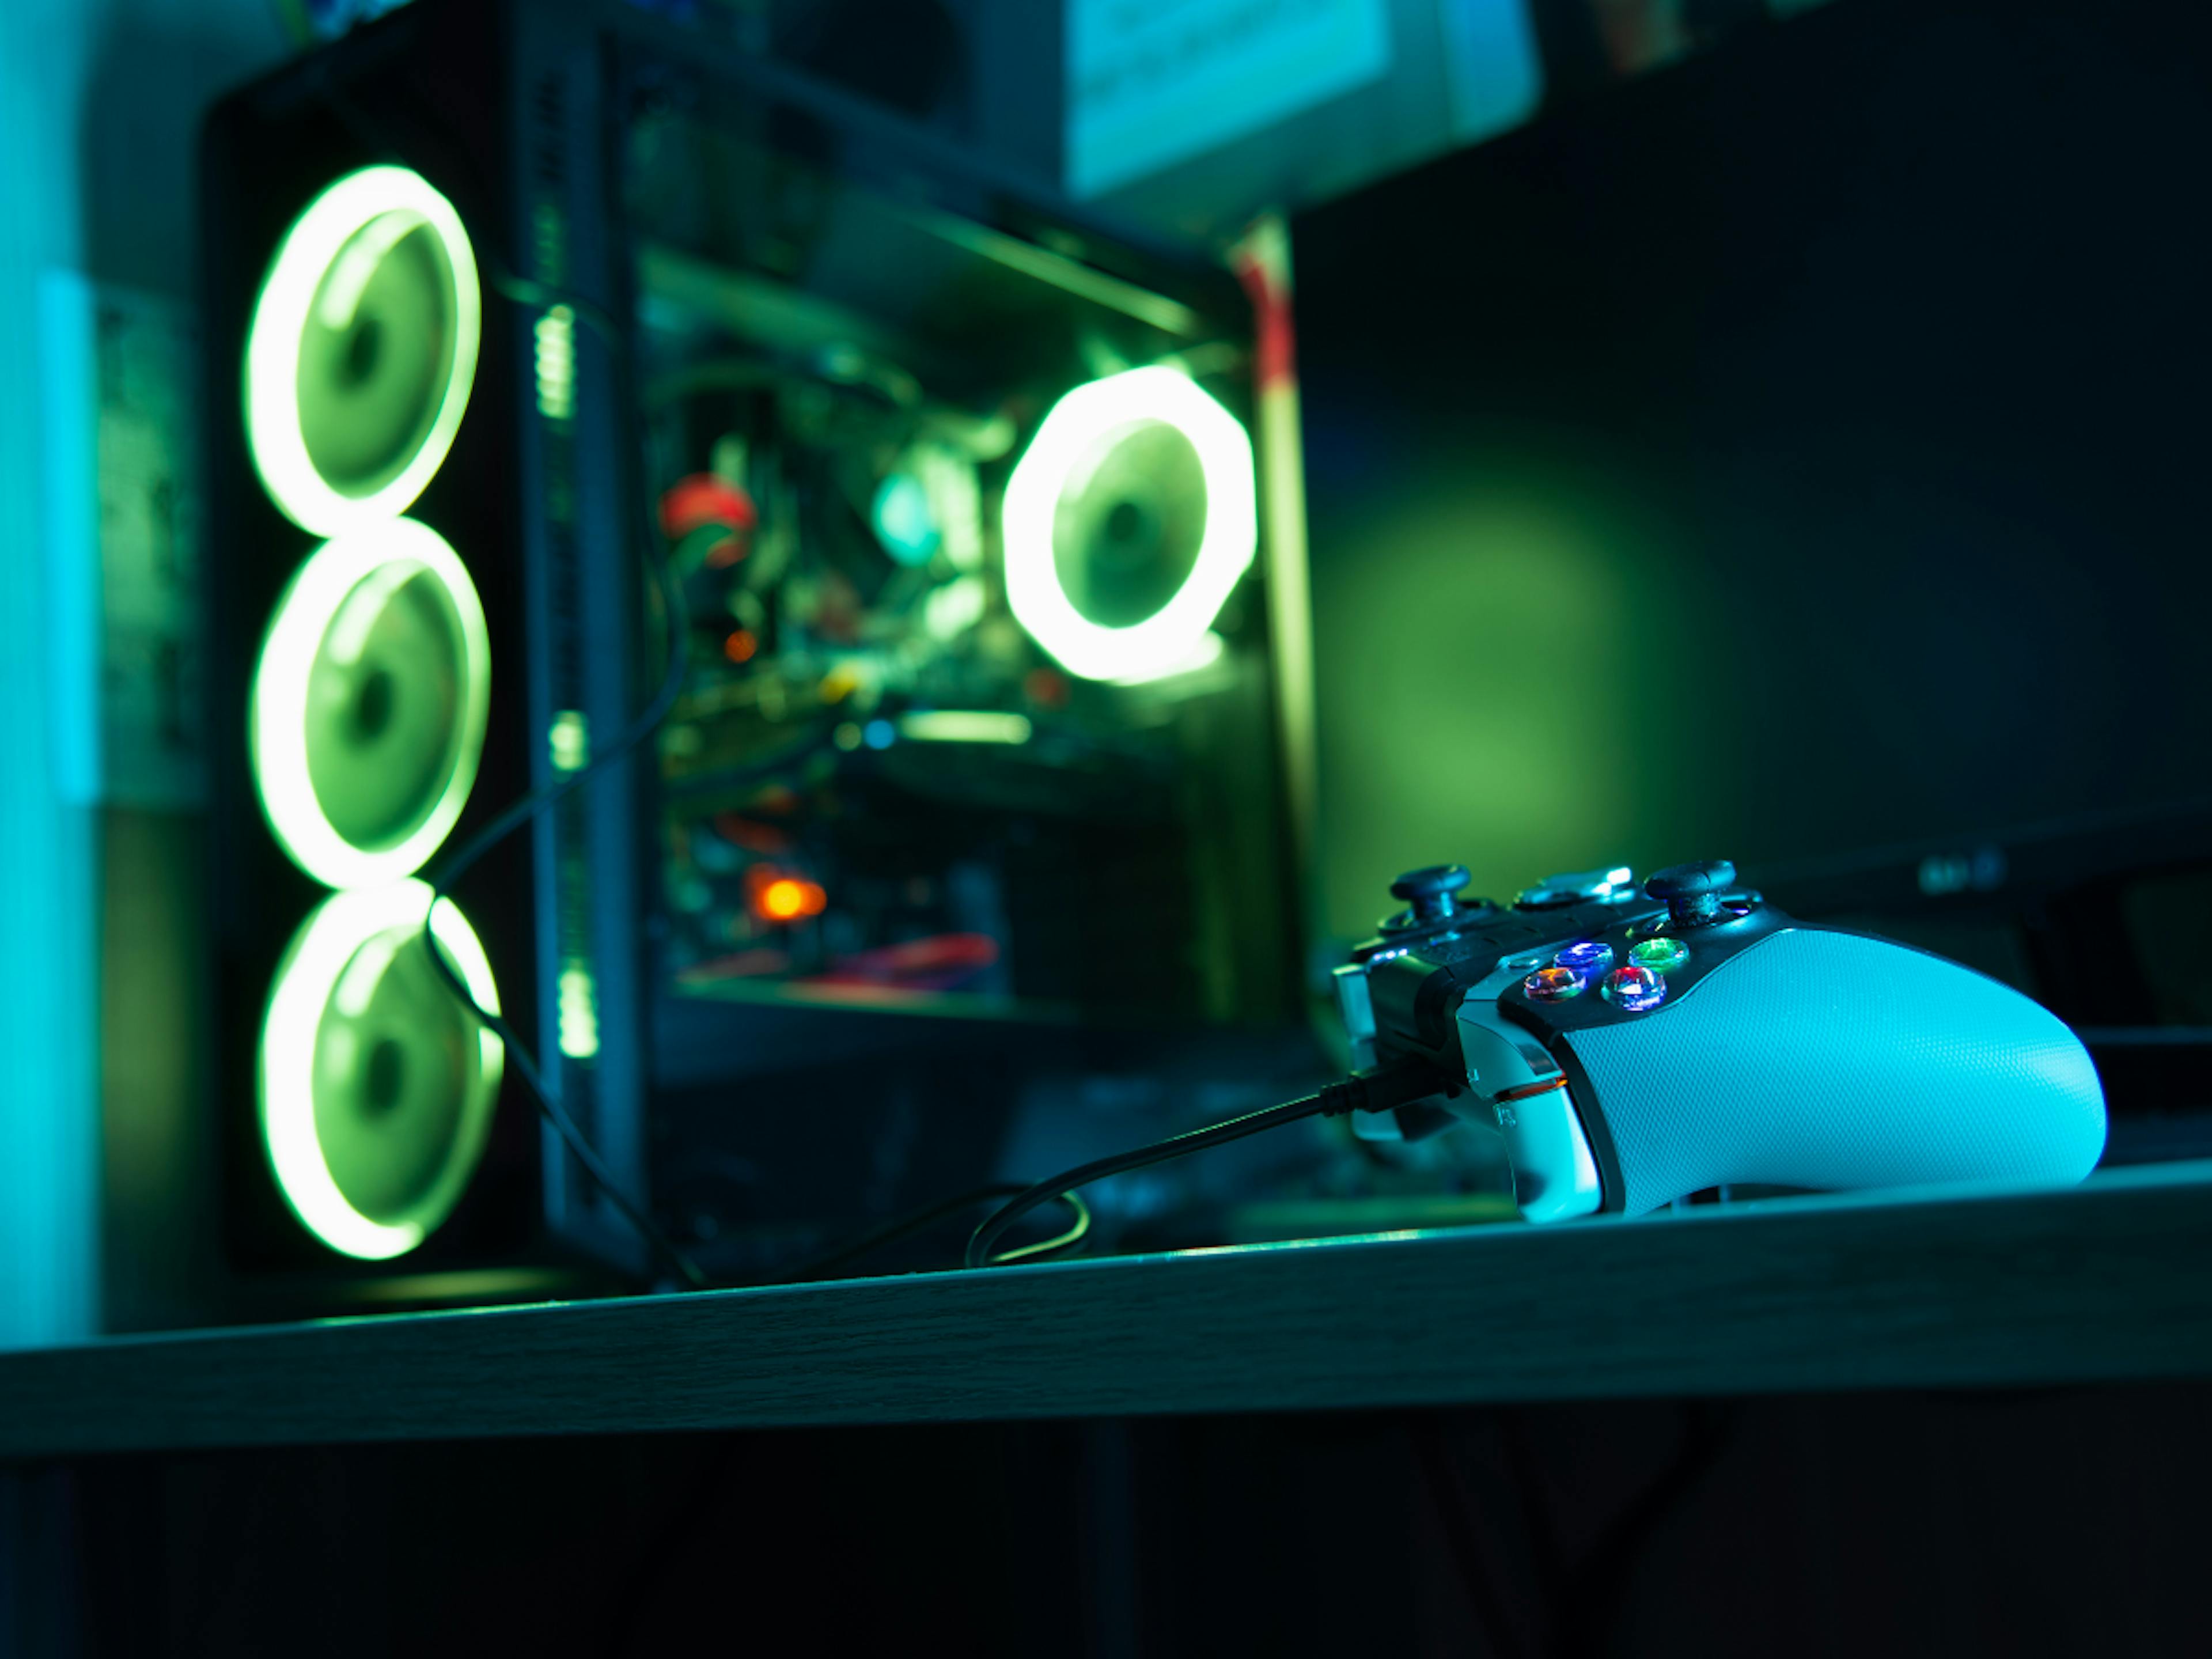 A controler on the front, and green light themed computer case on the background. 